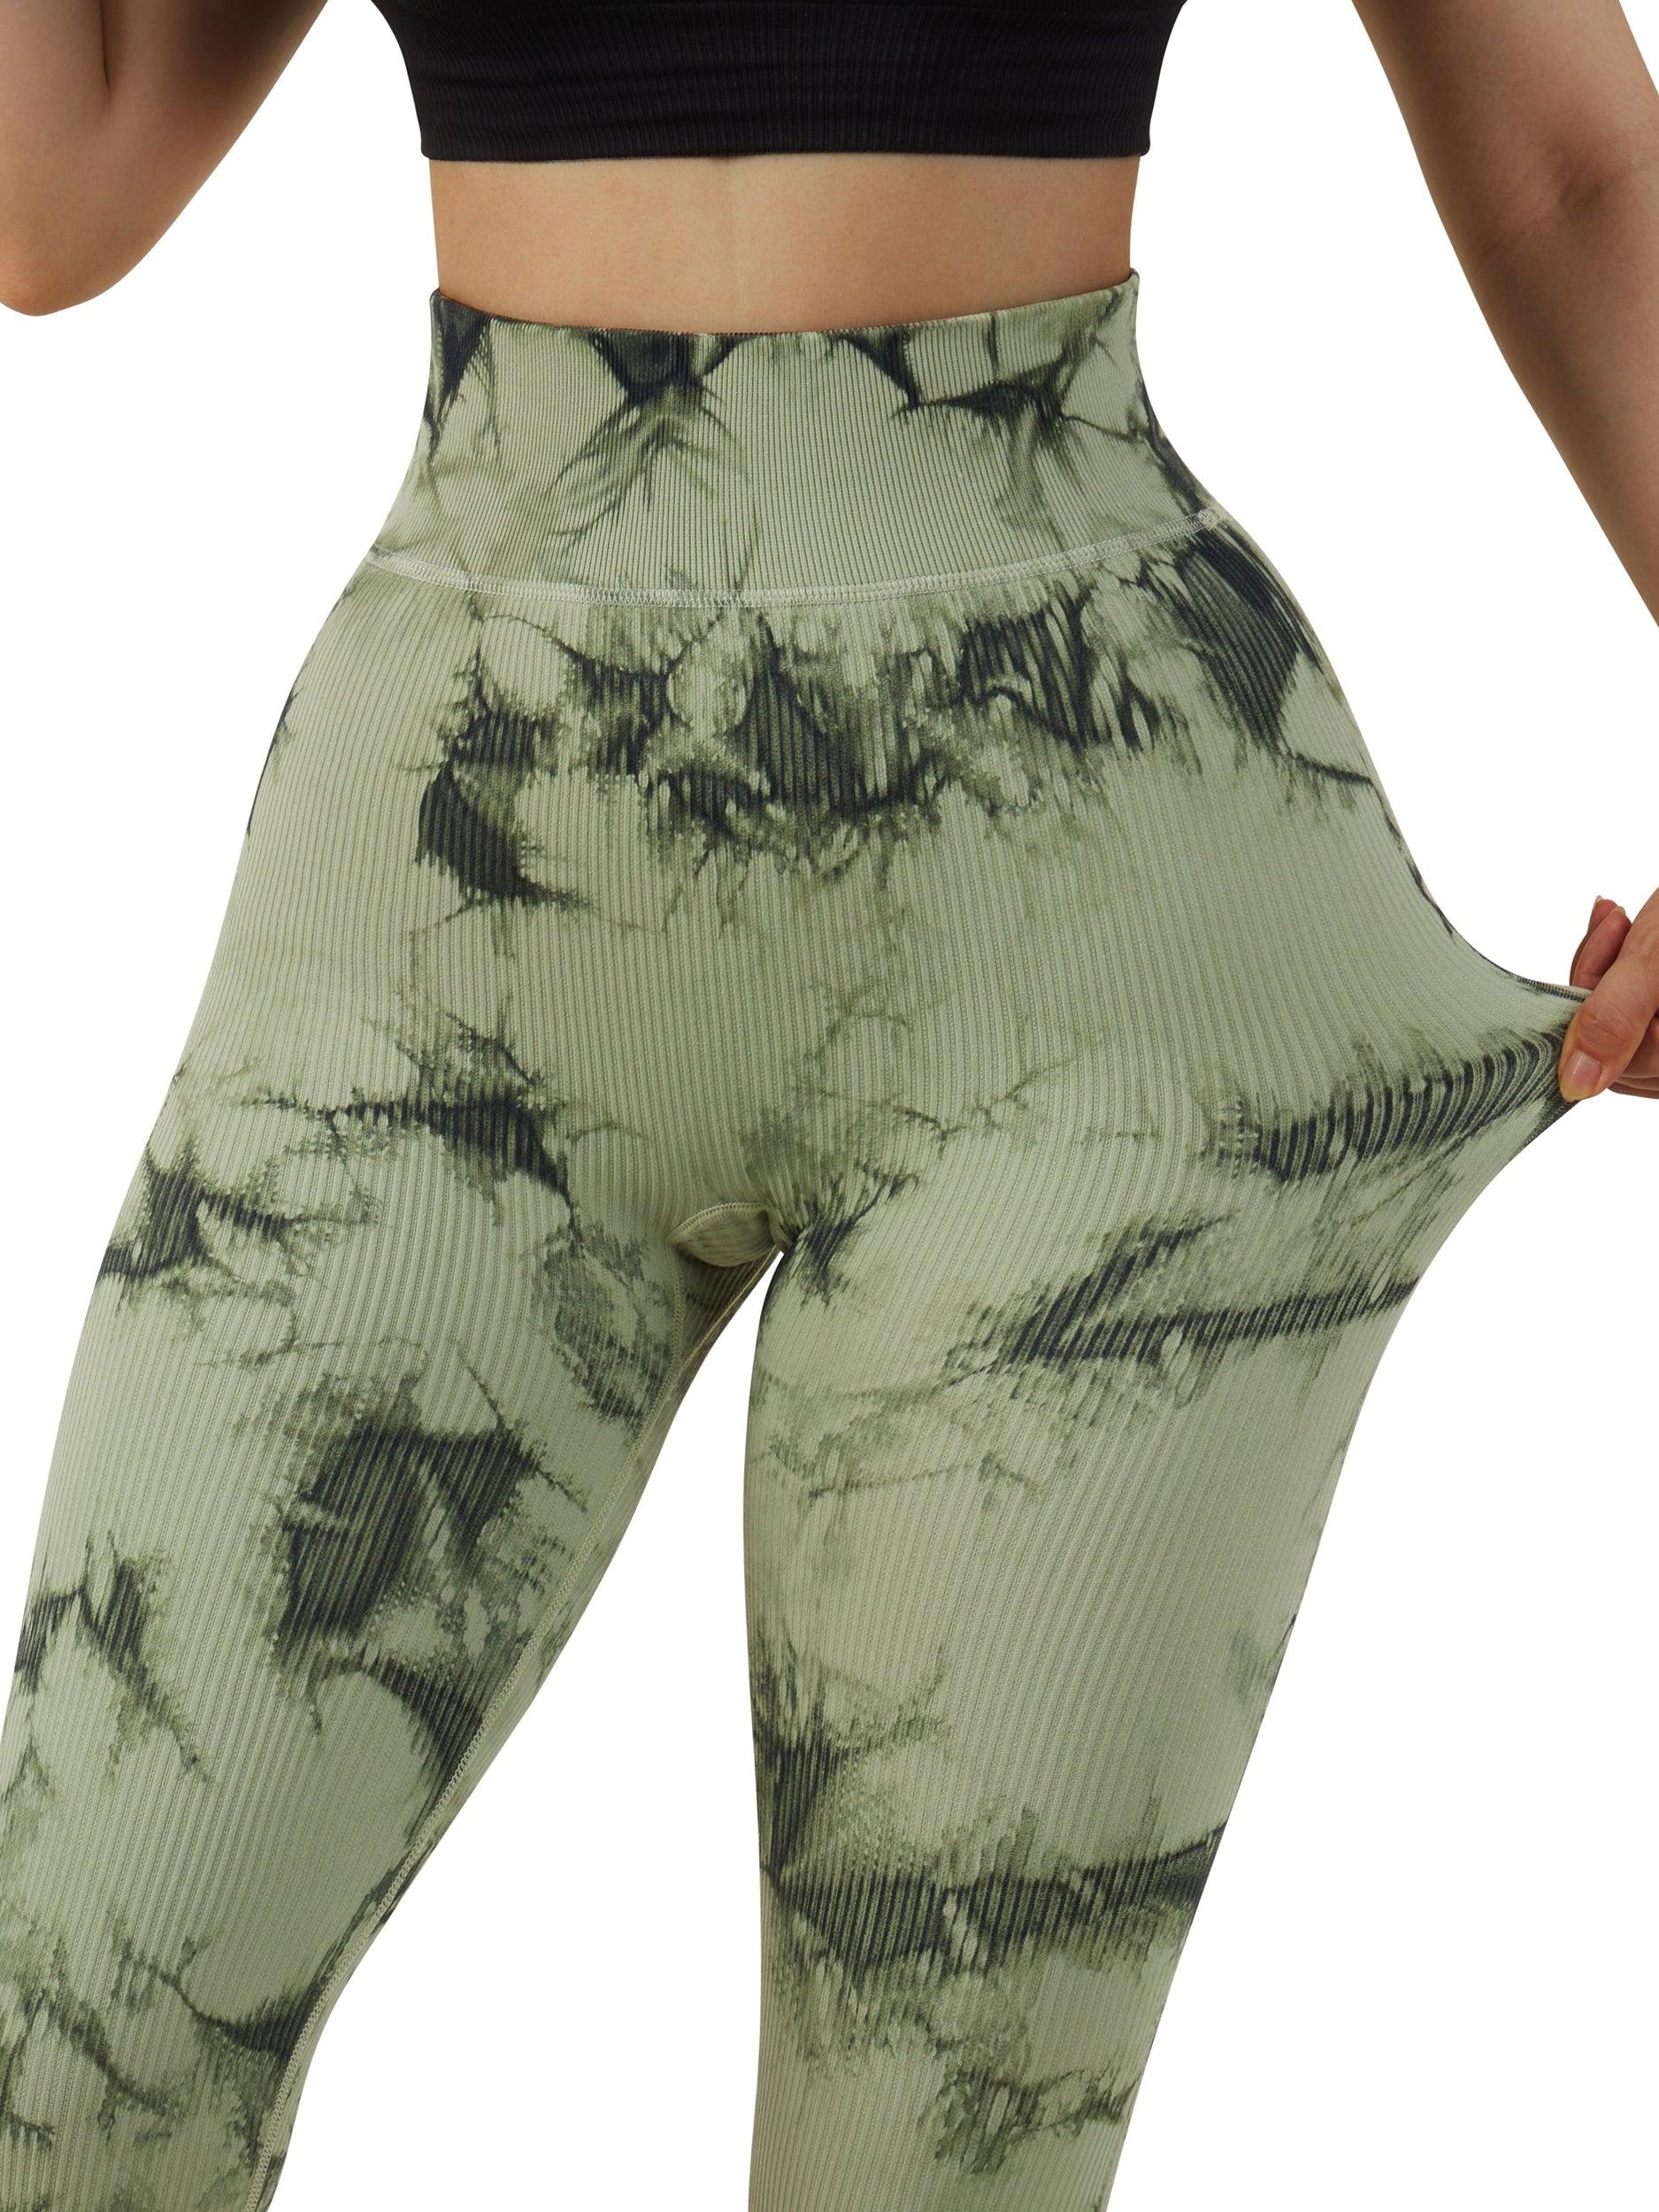 Suuksess Leggings for Women - Free Shipping, Original Styles and